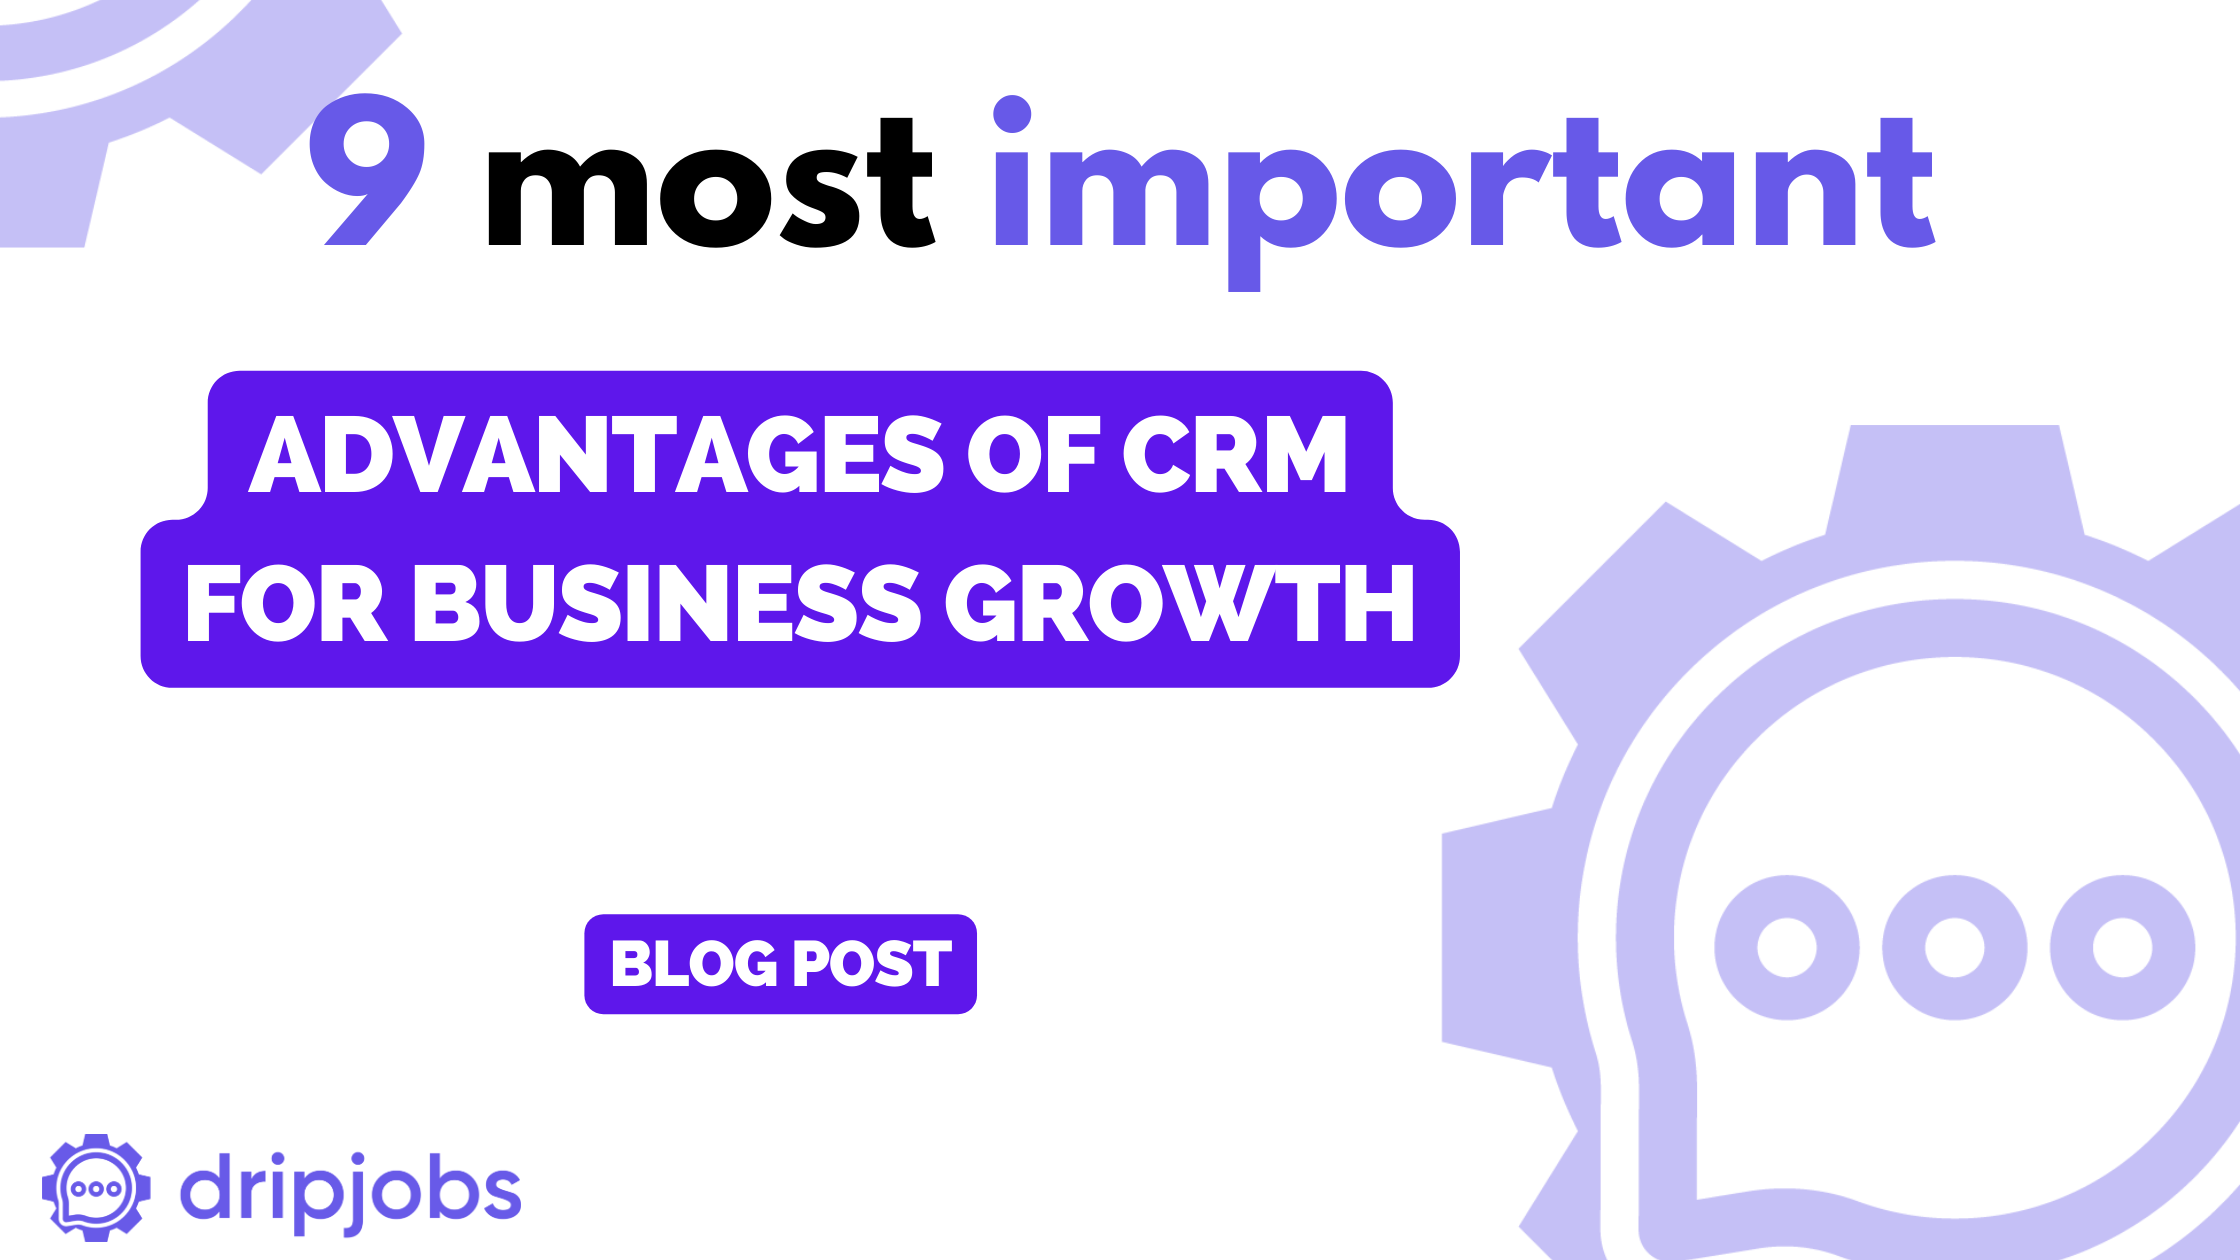 9 Most Important Advantages of CRM for Business Growth